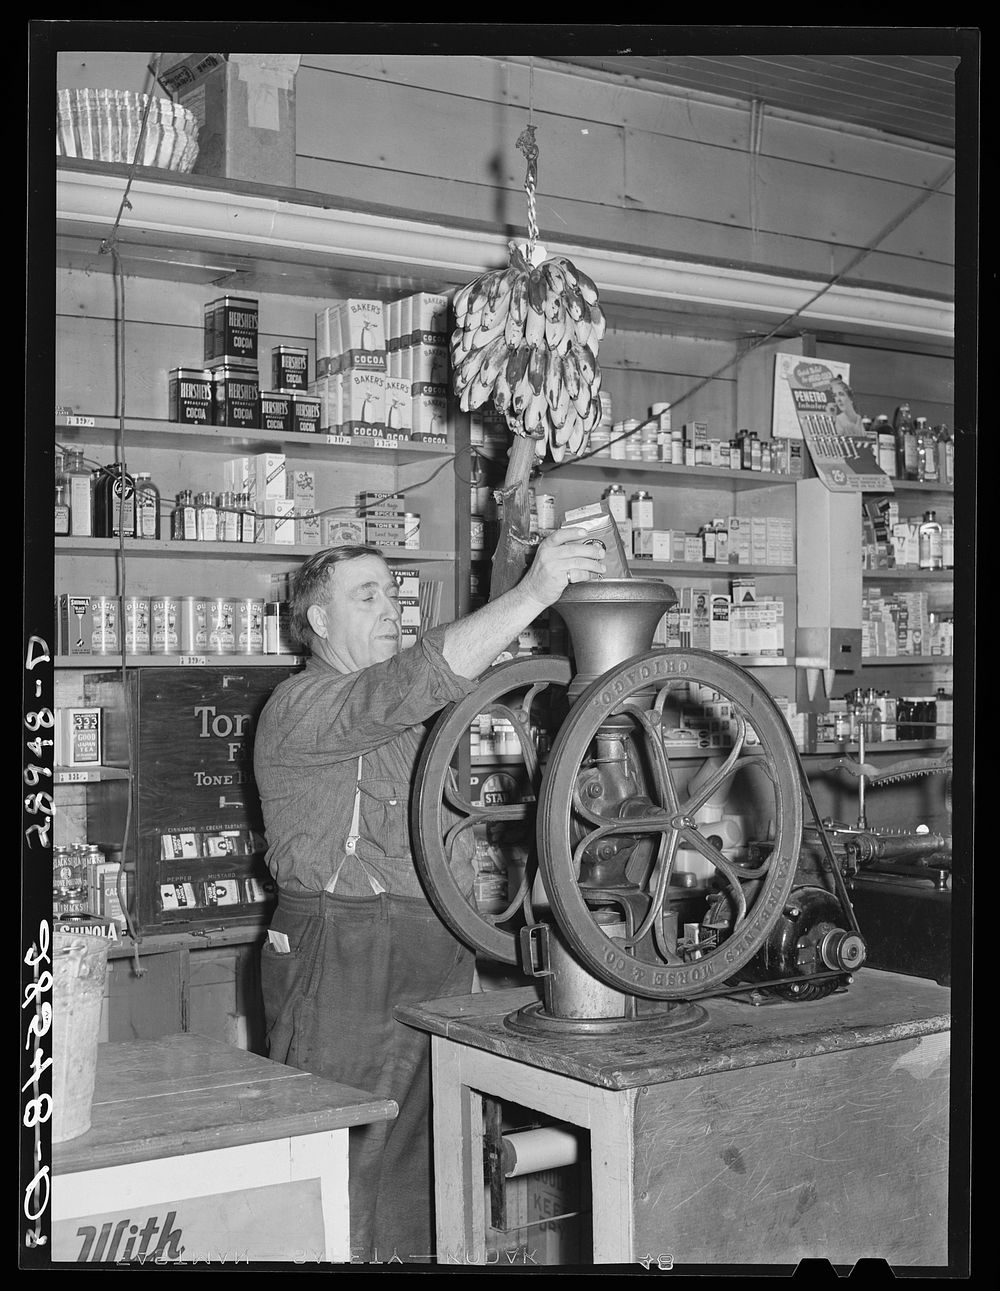 Grinding coffee. General store, Lamoille, Iowa. Sourced from the Library of Congress.